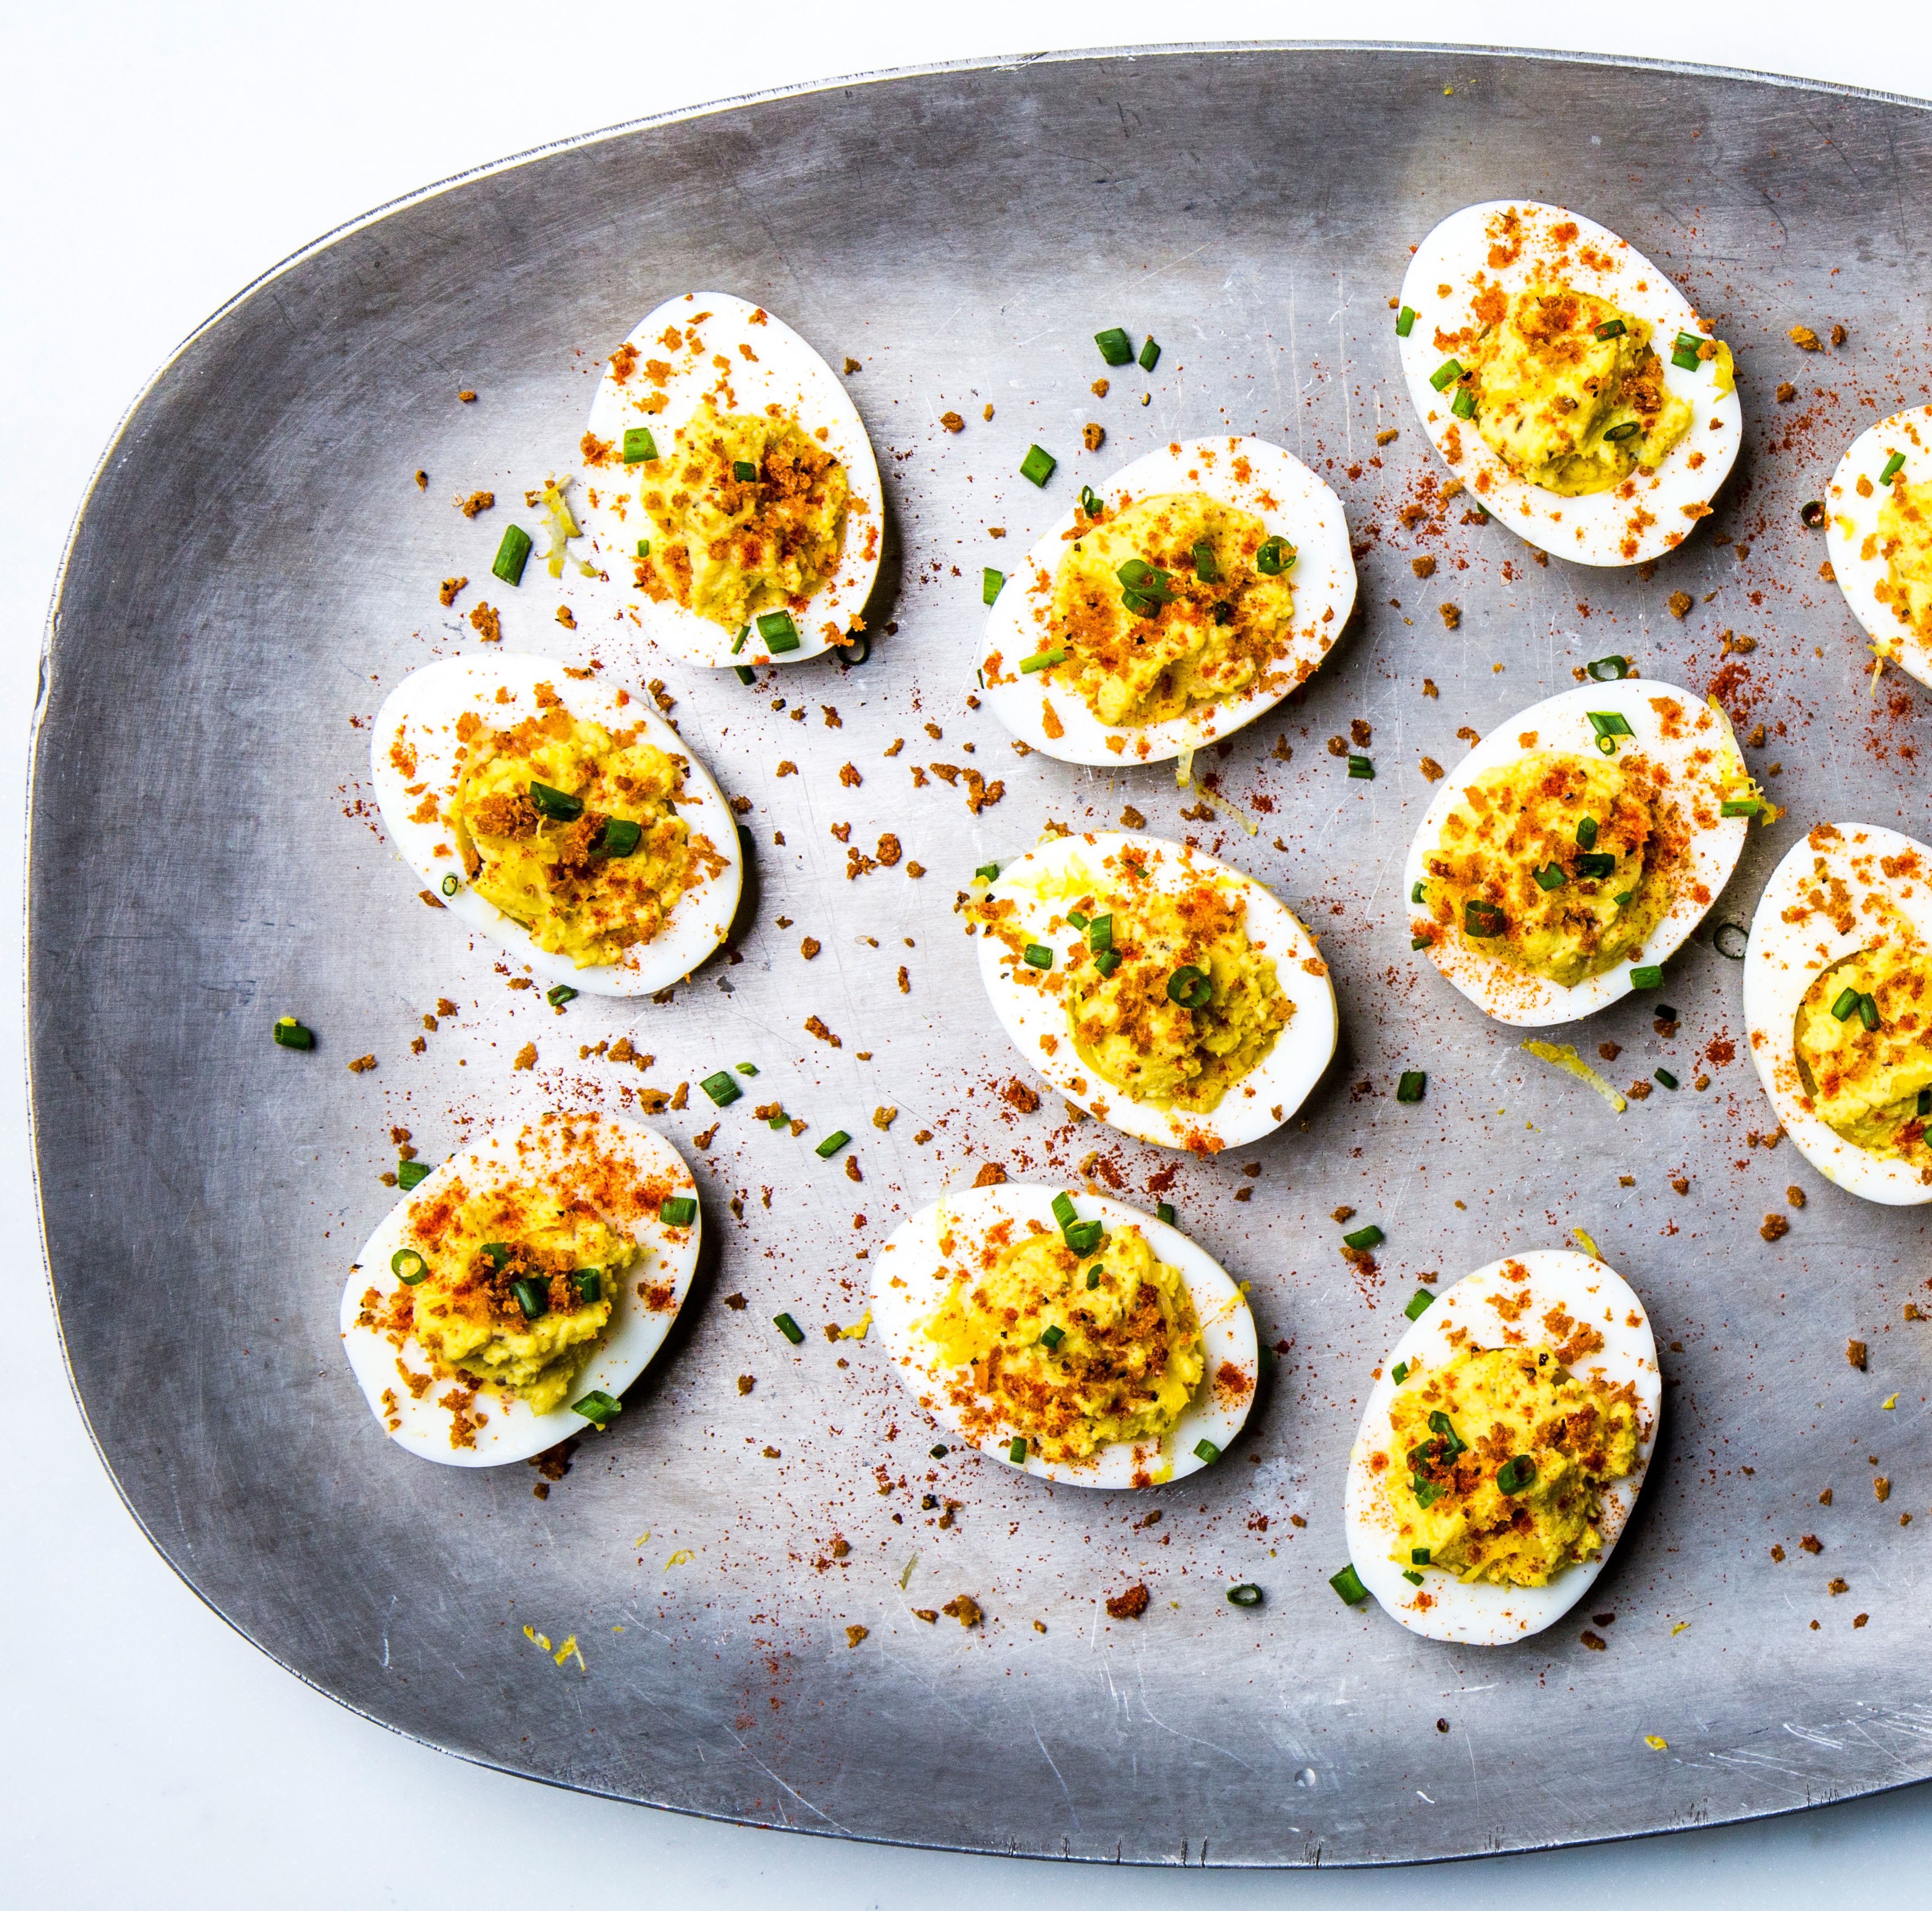 Not so “Devilish” Deviled Eggs – The New Perfect